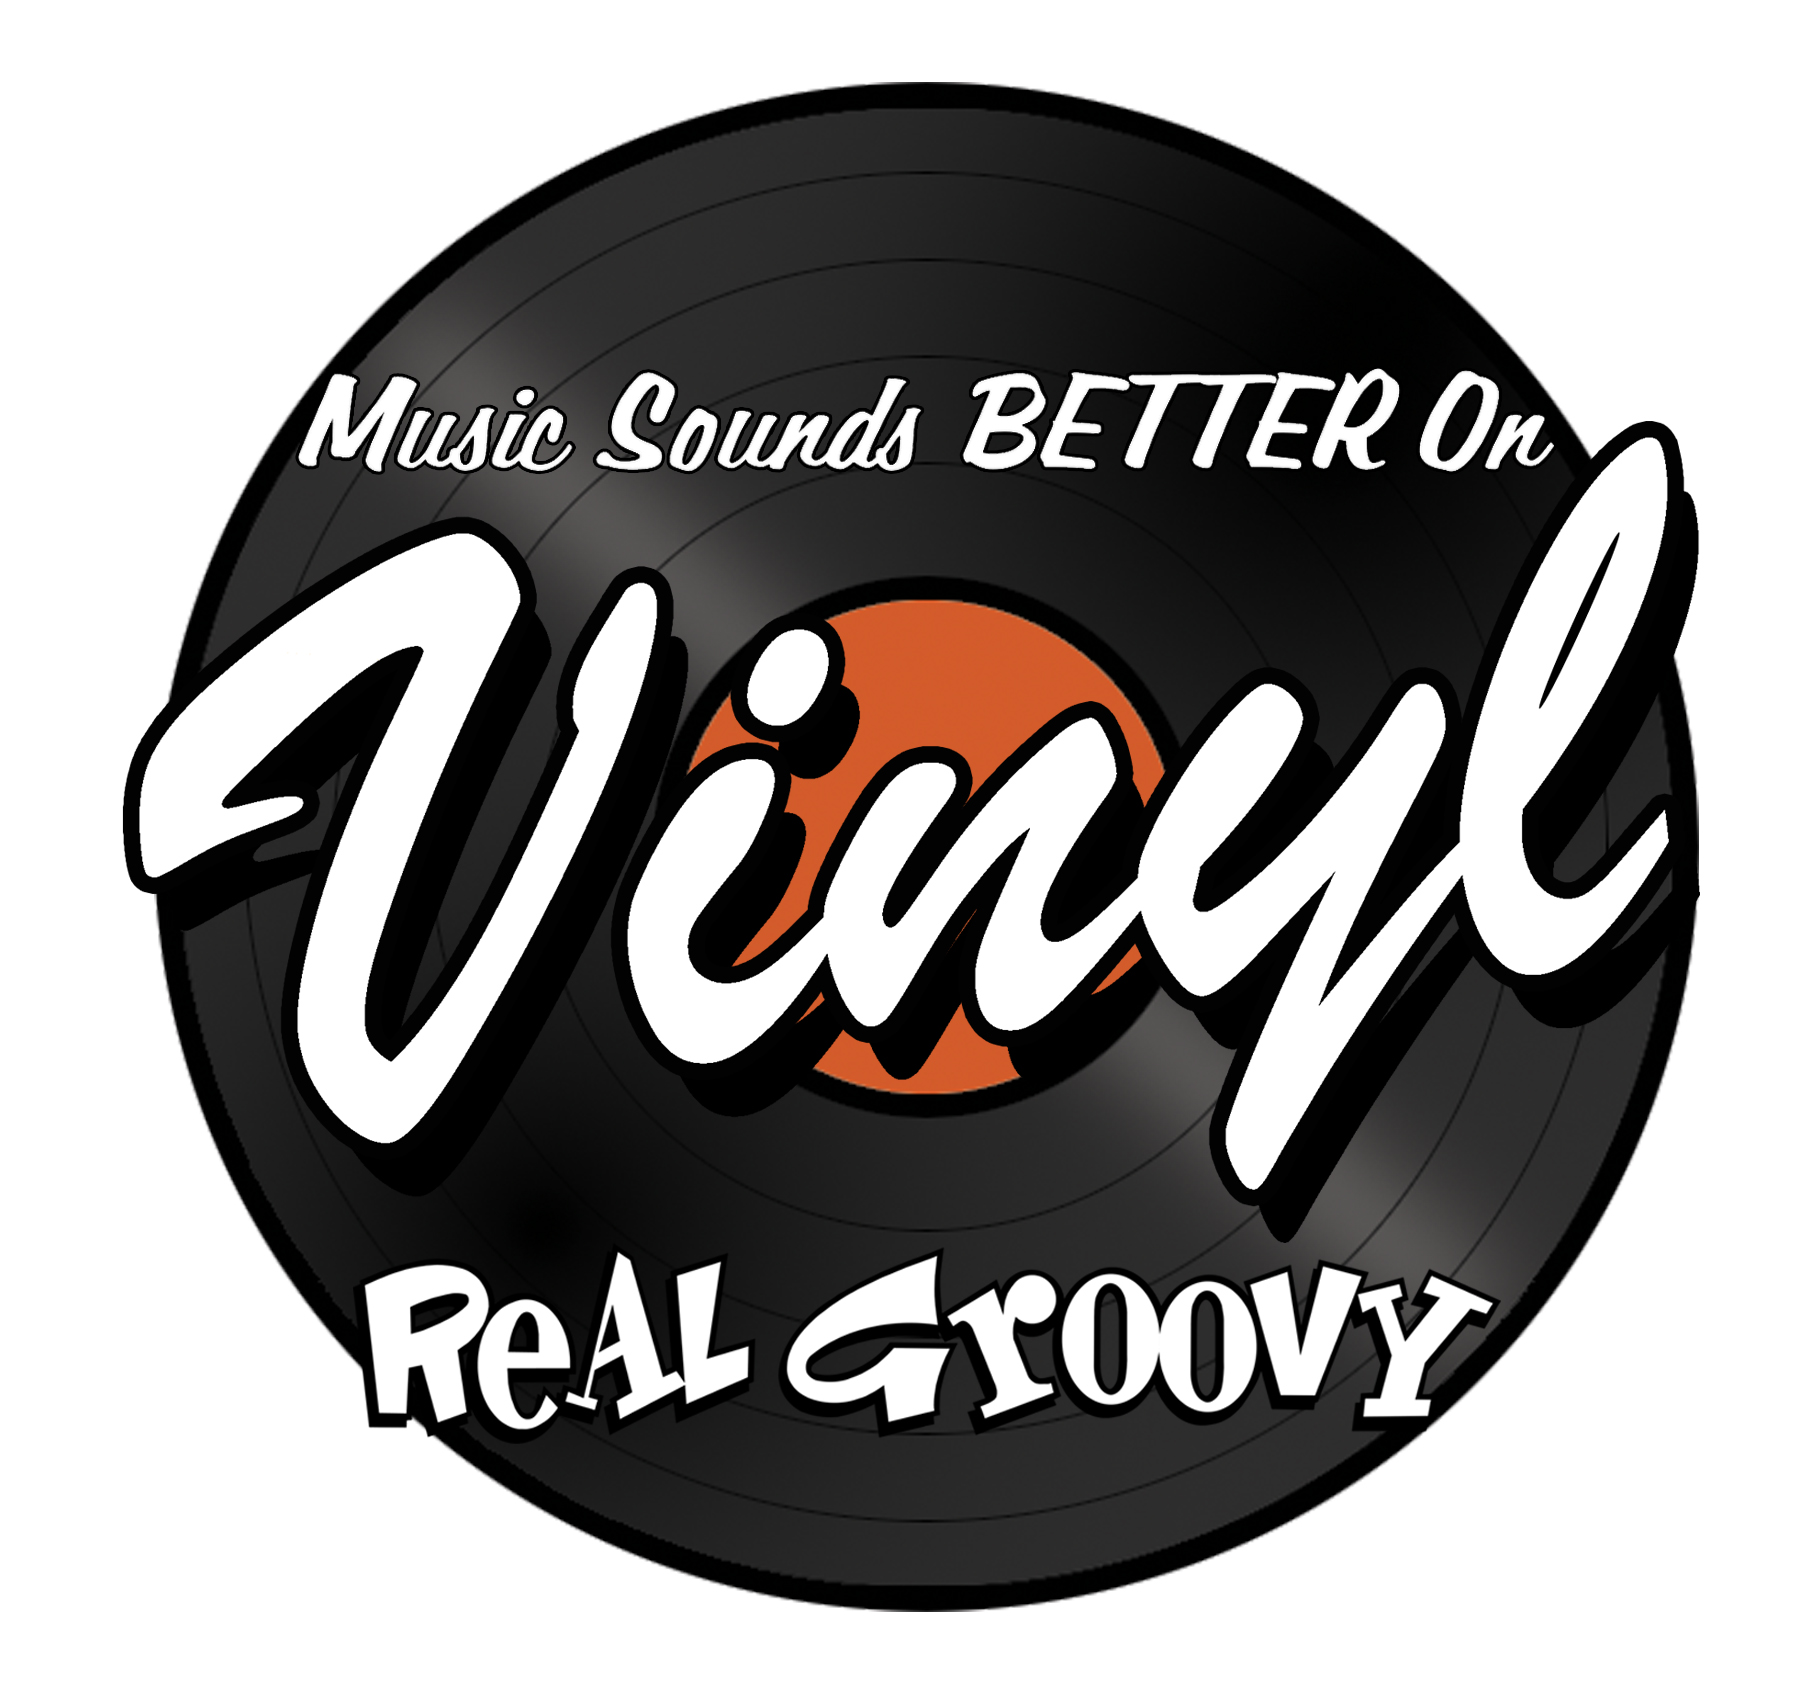 Real Groovy Sticker Music Sounds Better On Vinyl Decal